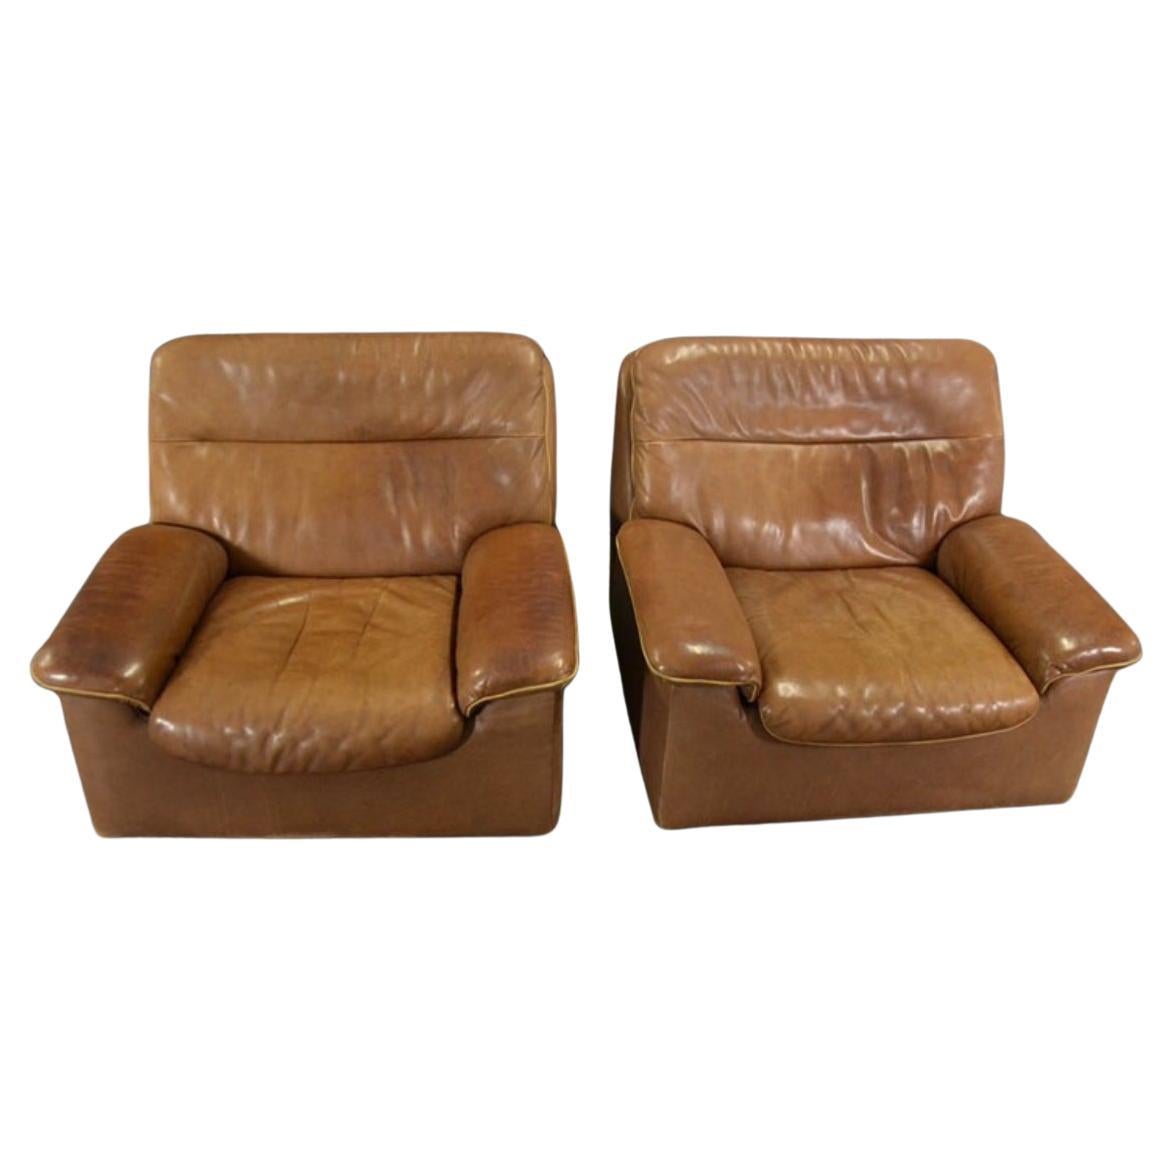 Here is a handsome De Sede DS 66 natural leather loveseat with two matching DS 66 single lounge chairs. This set showcases a thick dark brown leather with nice patina that is extremely comfortable. In original condition with visible signs of wear